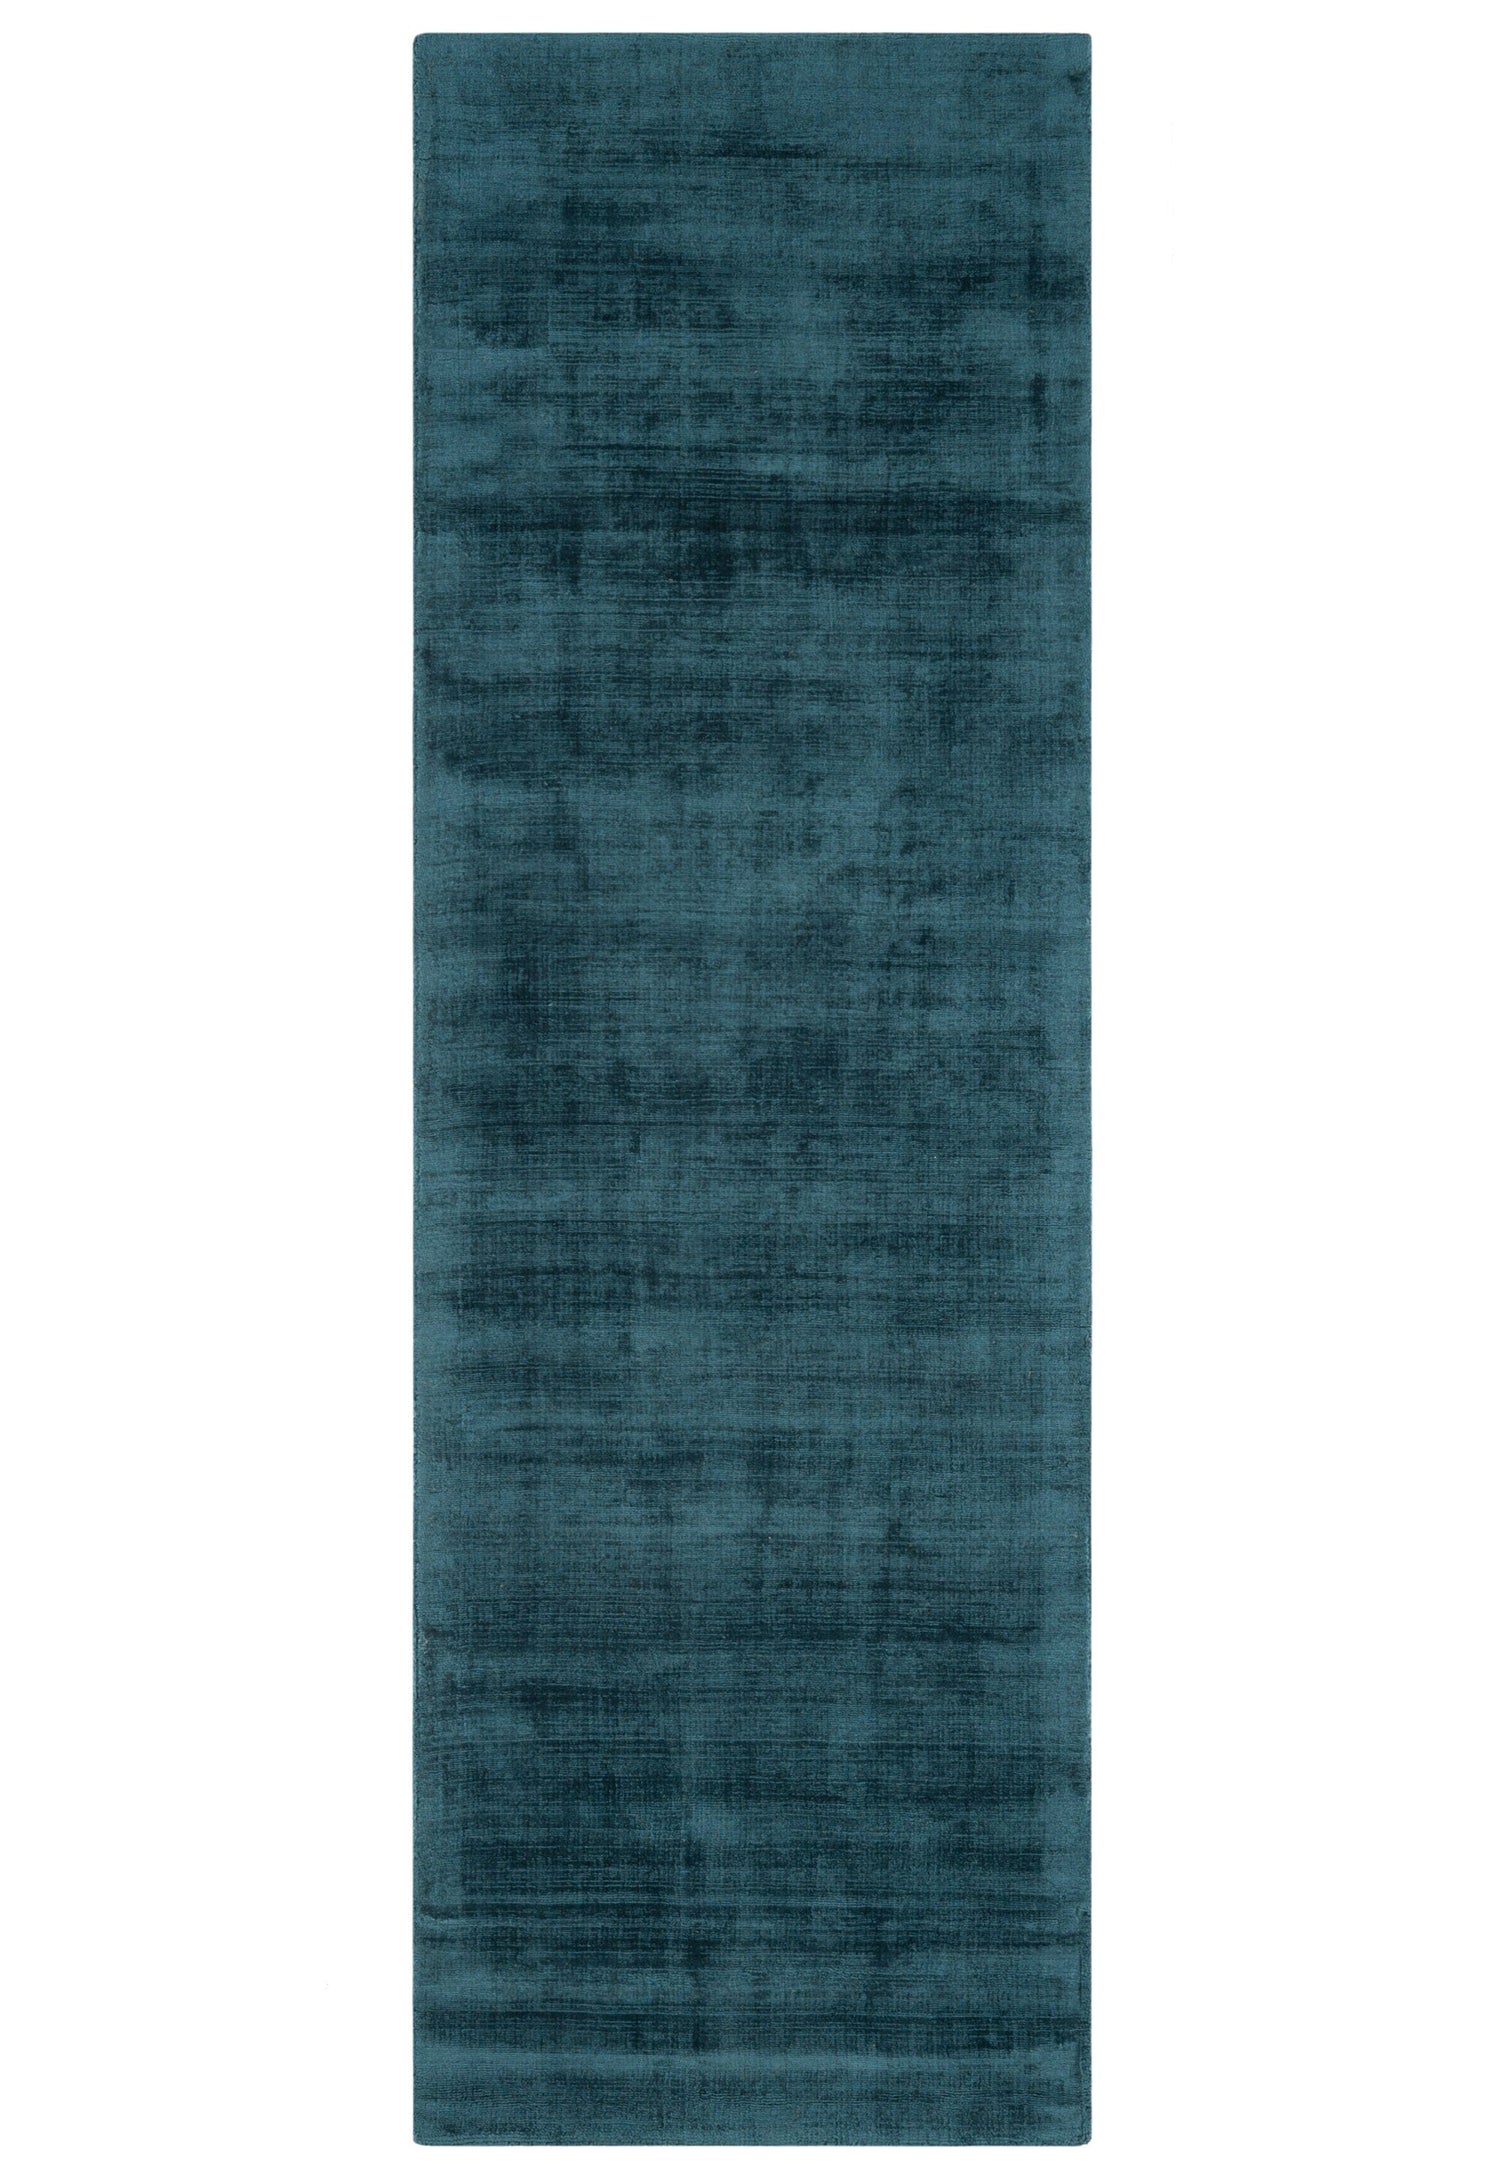  Asiatic Carpets-Asiatic Carpets Blade Hand Woven Runner Teal - 66 x 240cm-Green 597 